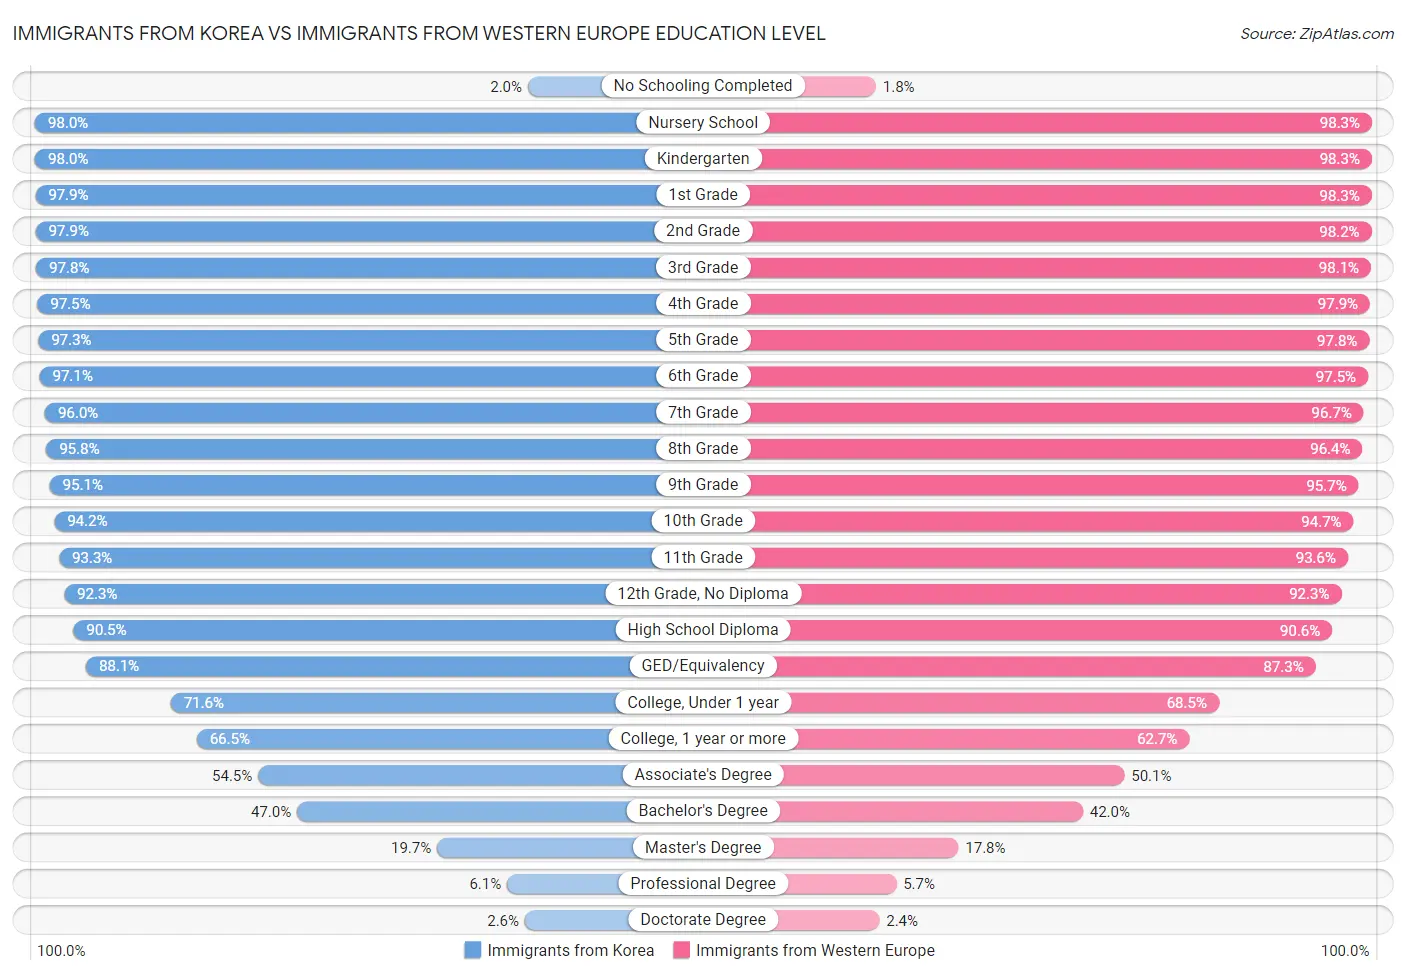 Immigrants from Korea vs Immigrants from Western Europe Education Level